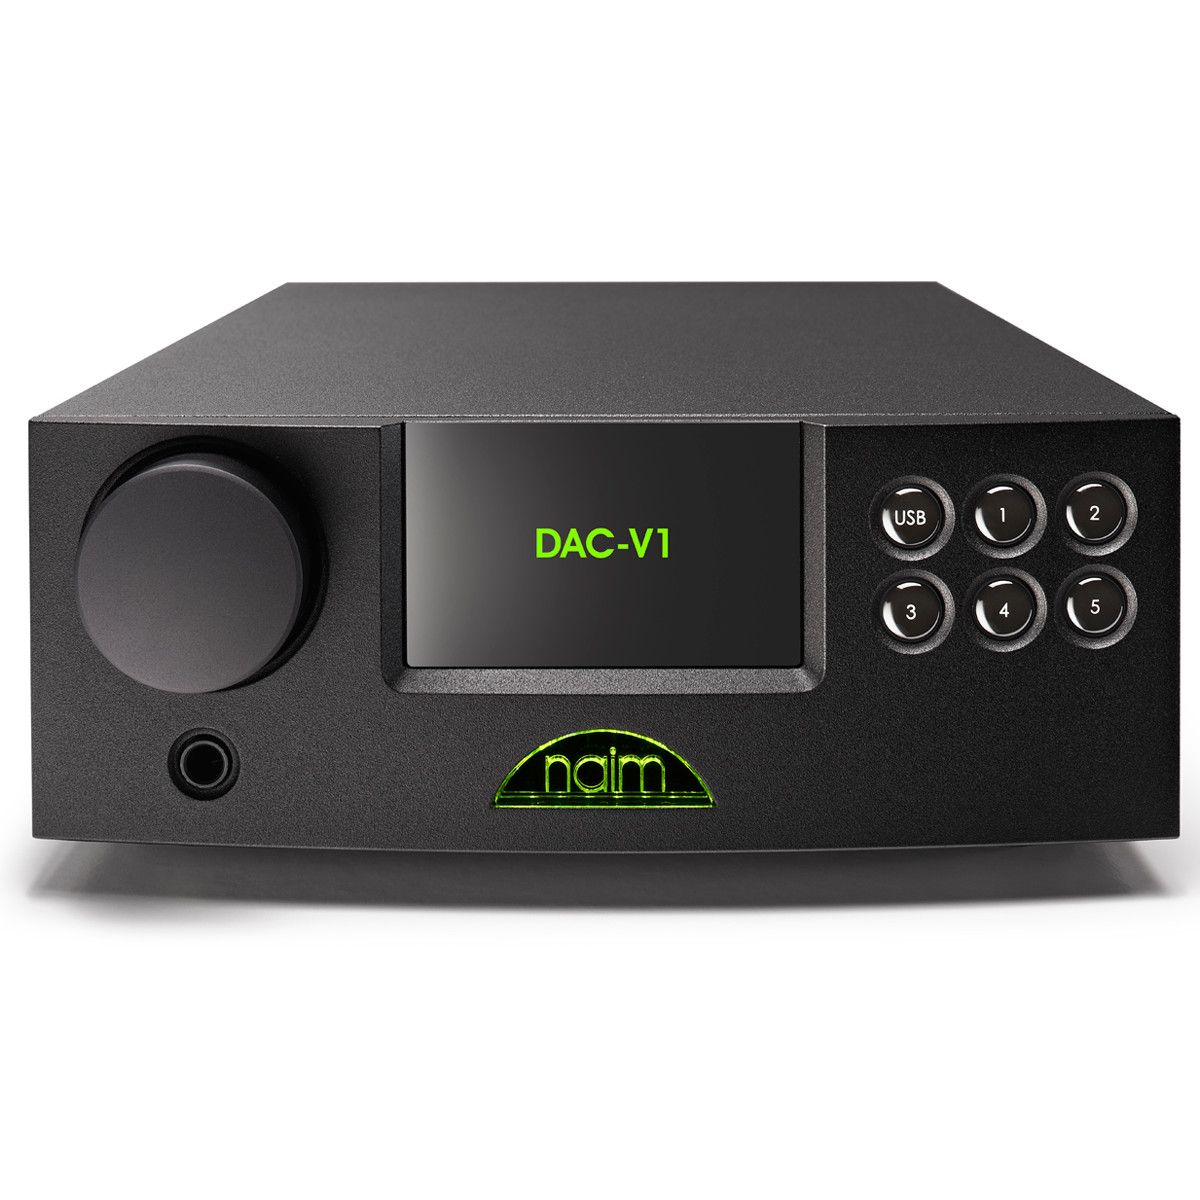 DAC-V1 front view